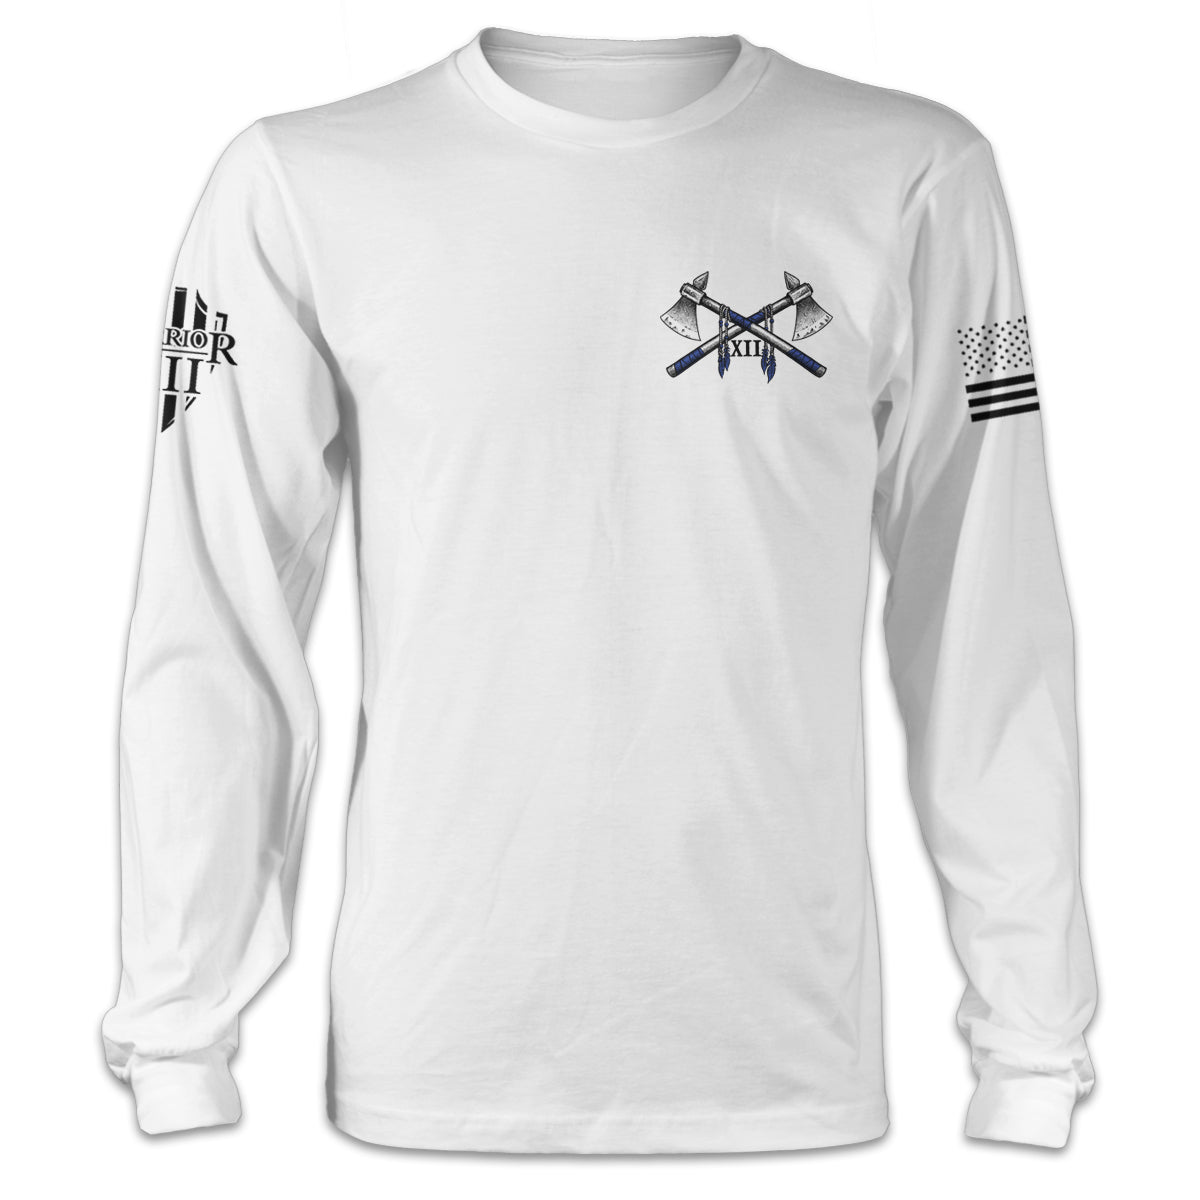 A white long sleeve shirt with two axes printed on the front.